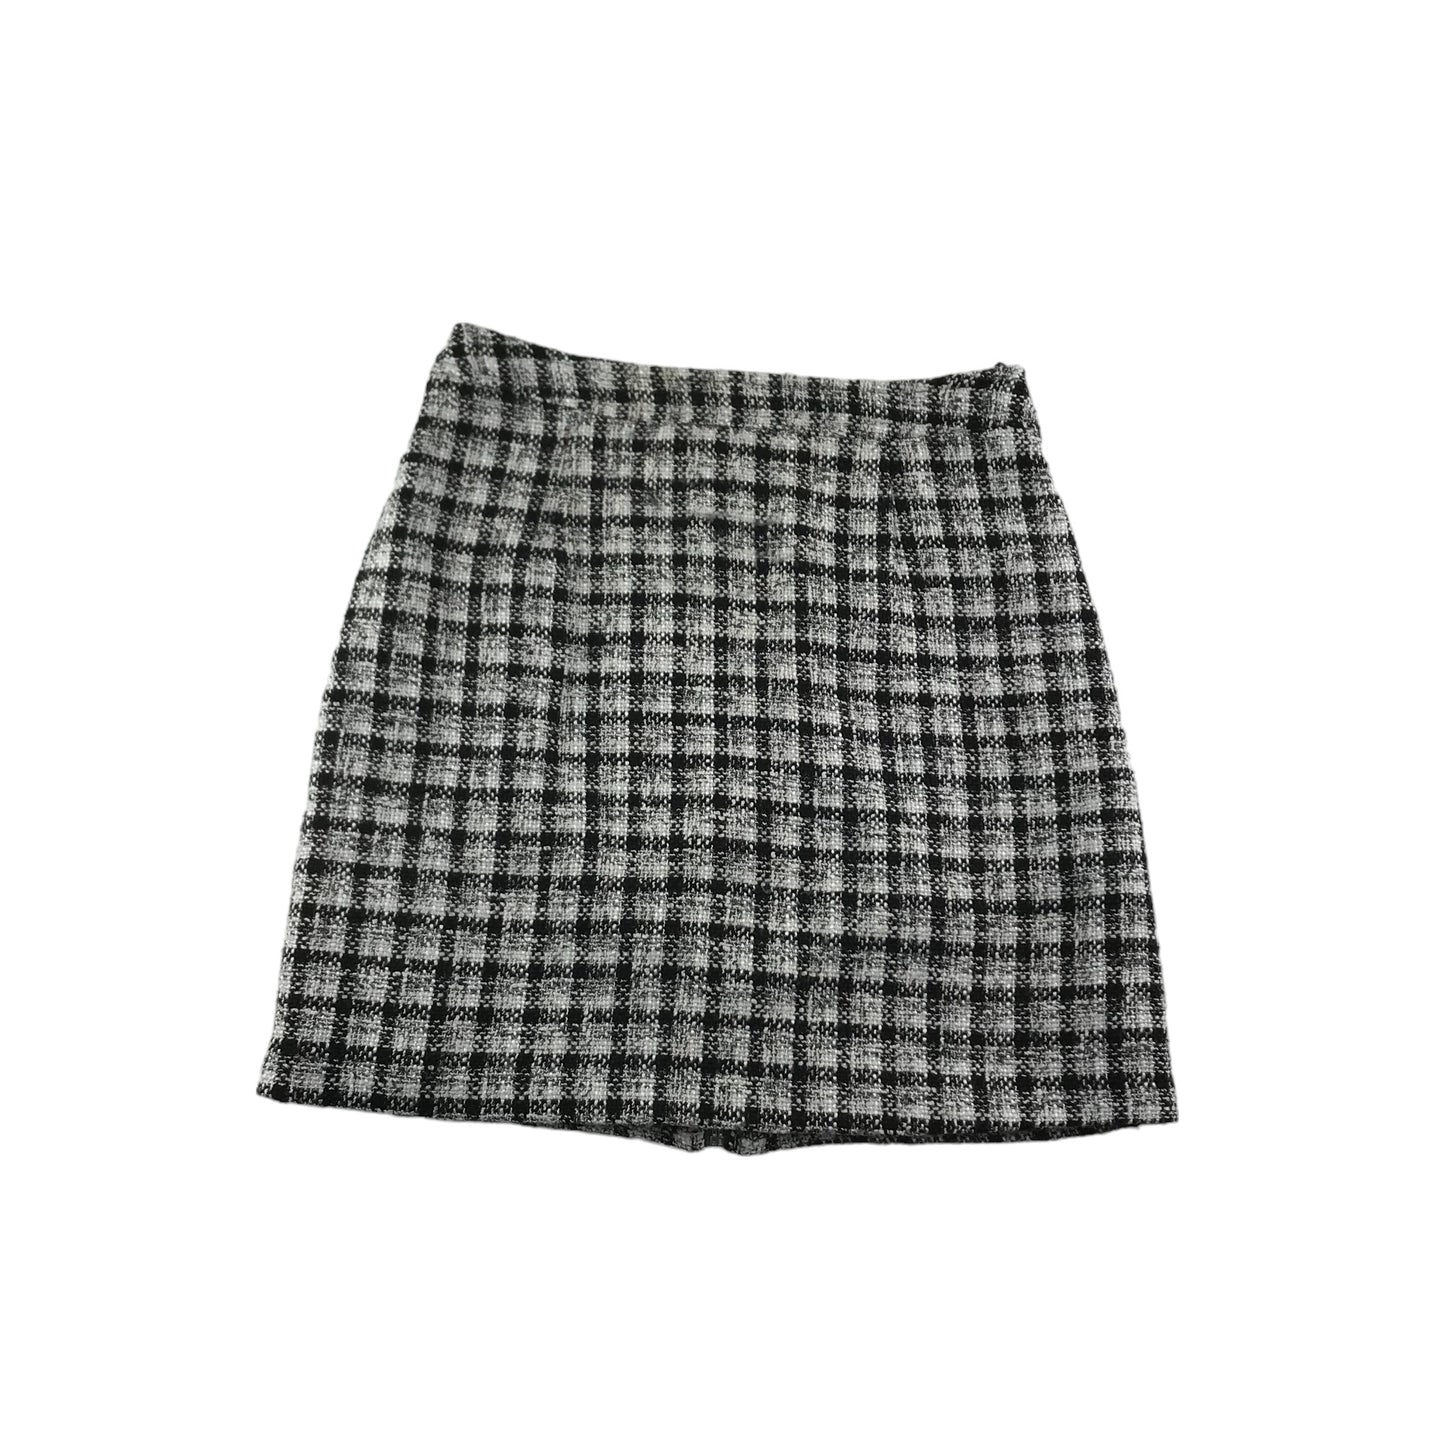 New Look Shorts Women's Size 8 Black and White Checked